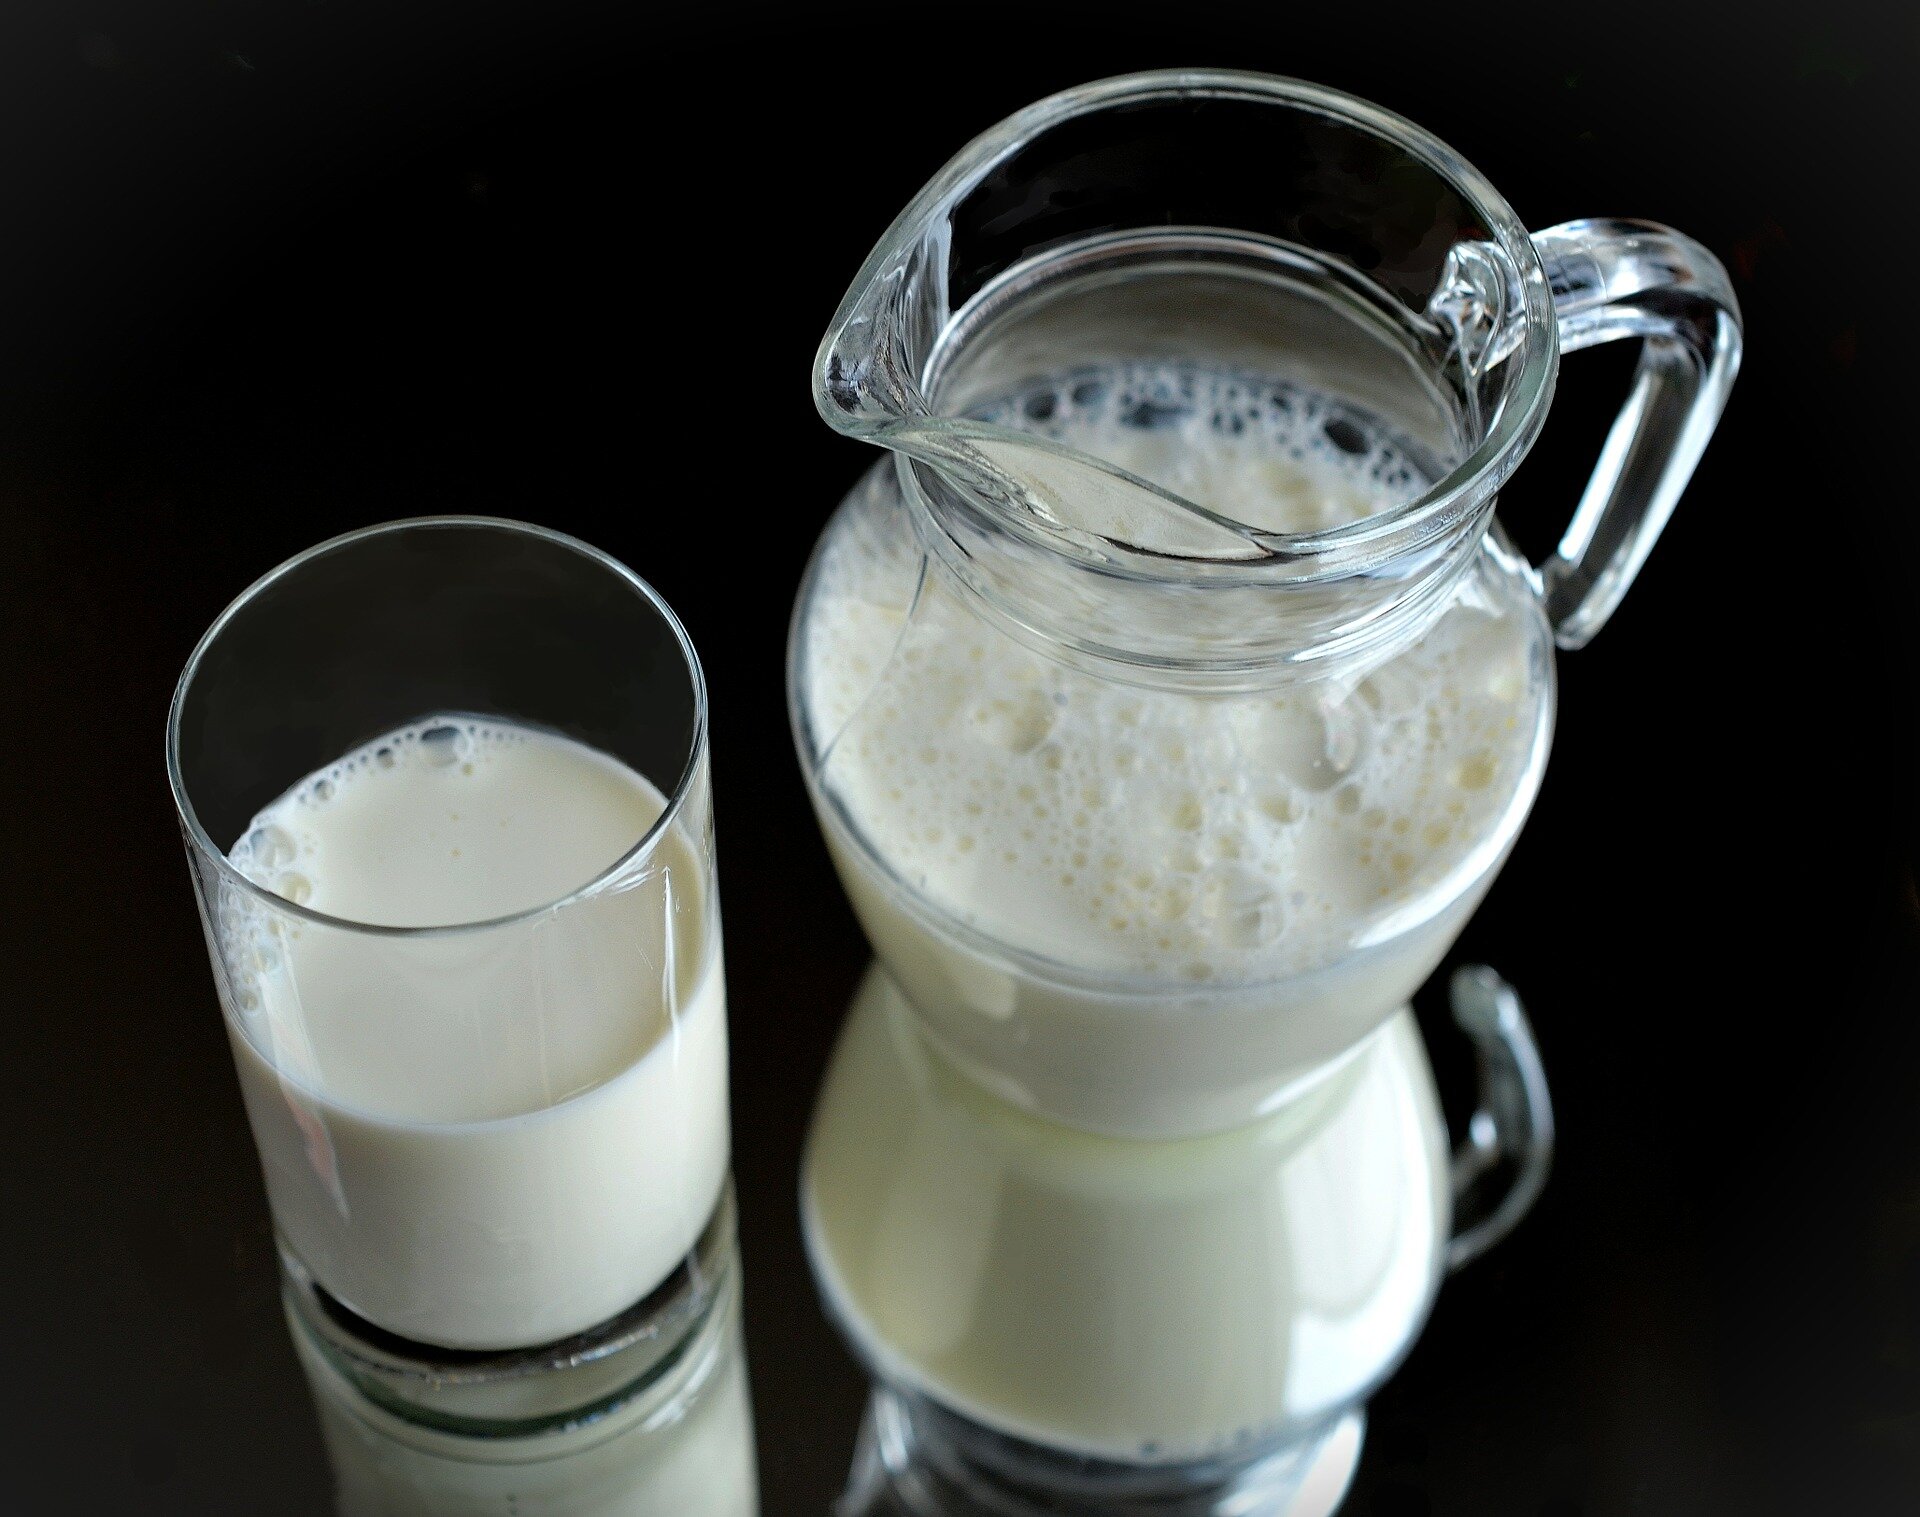 Decline in Childhood Milk Consumption May Affect Long Term Health